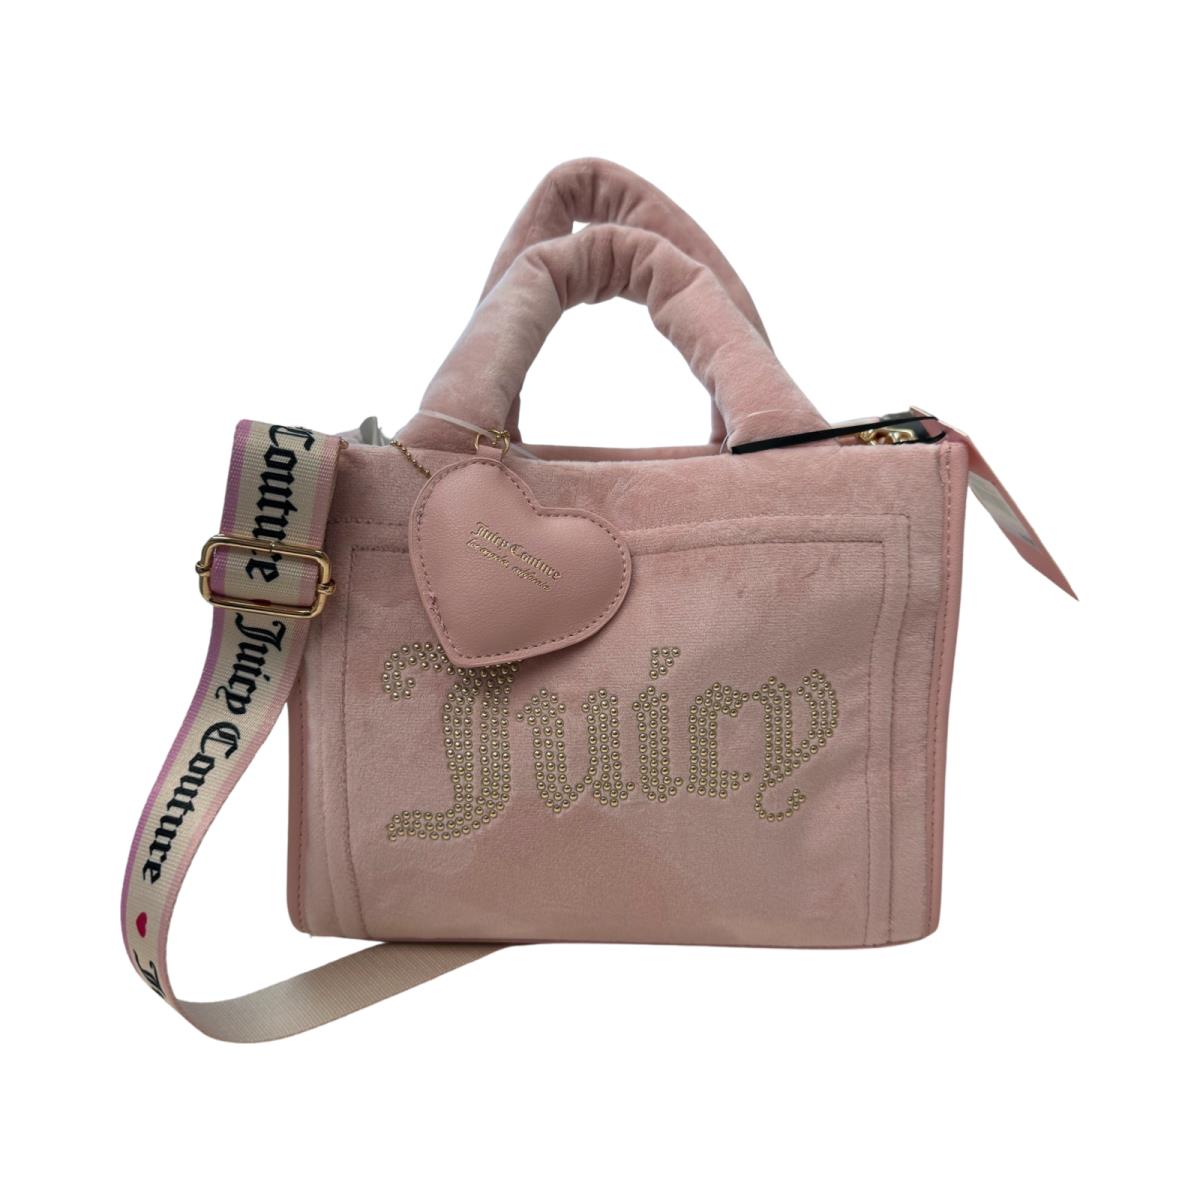 Juicy Couture Extra Spender Mini Tote Bag Velour Purse Pink Diamond - Exterior: Pink, Lining: